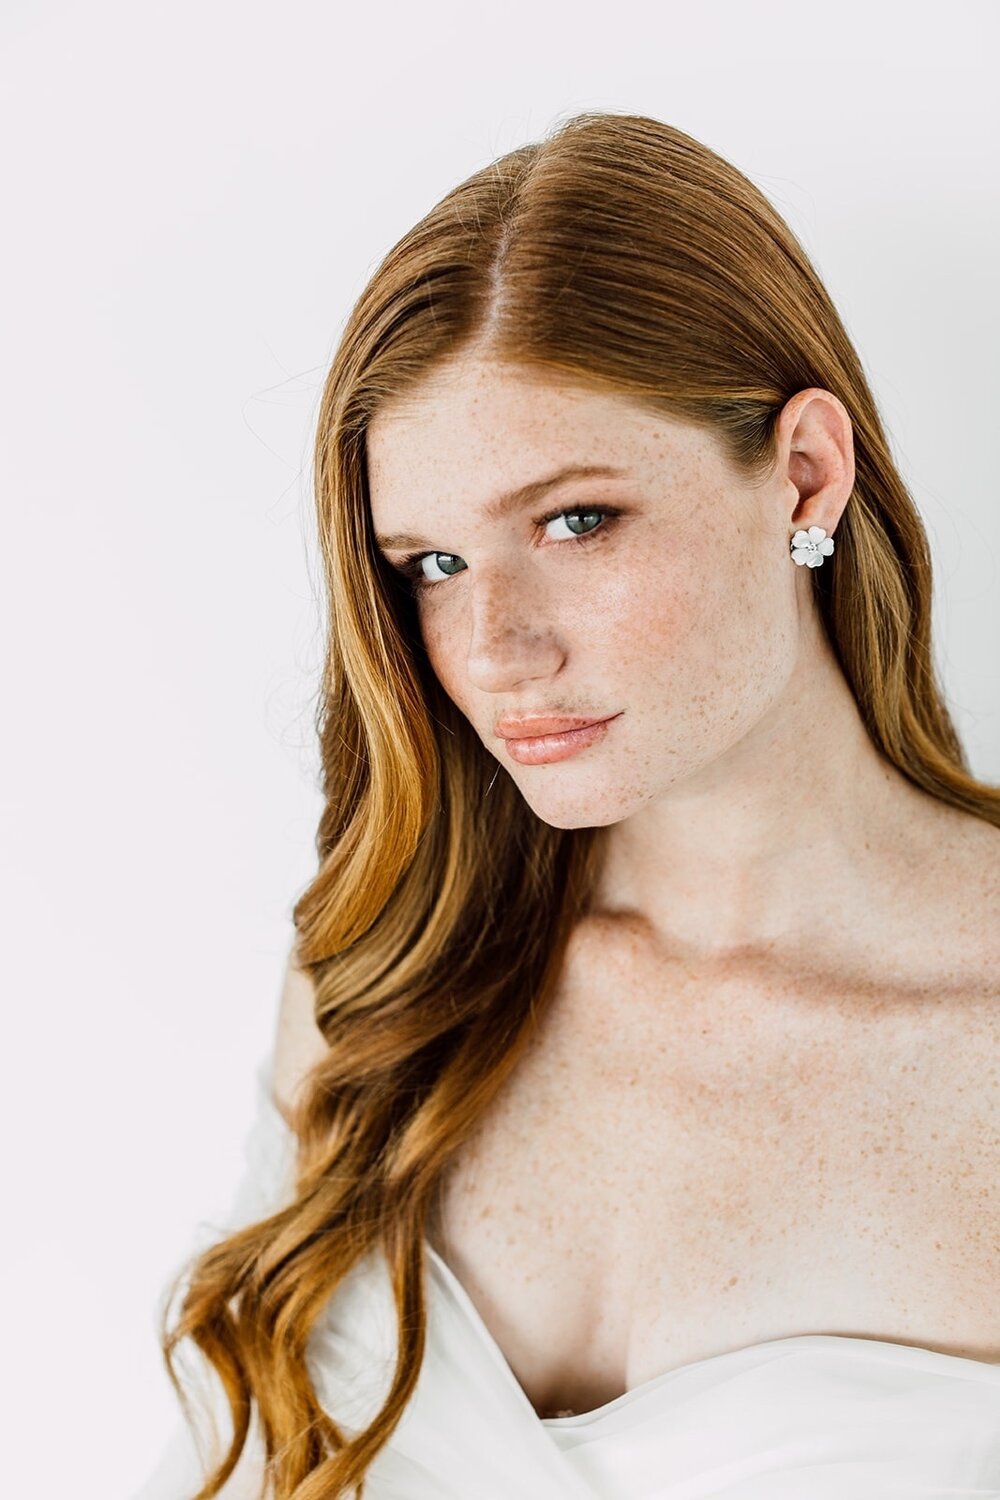 Model wearing pearl bridal earrings from Maria Elena Headpieces. They are a stud with a floral shape